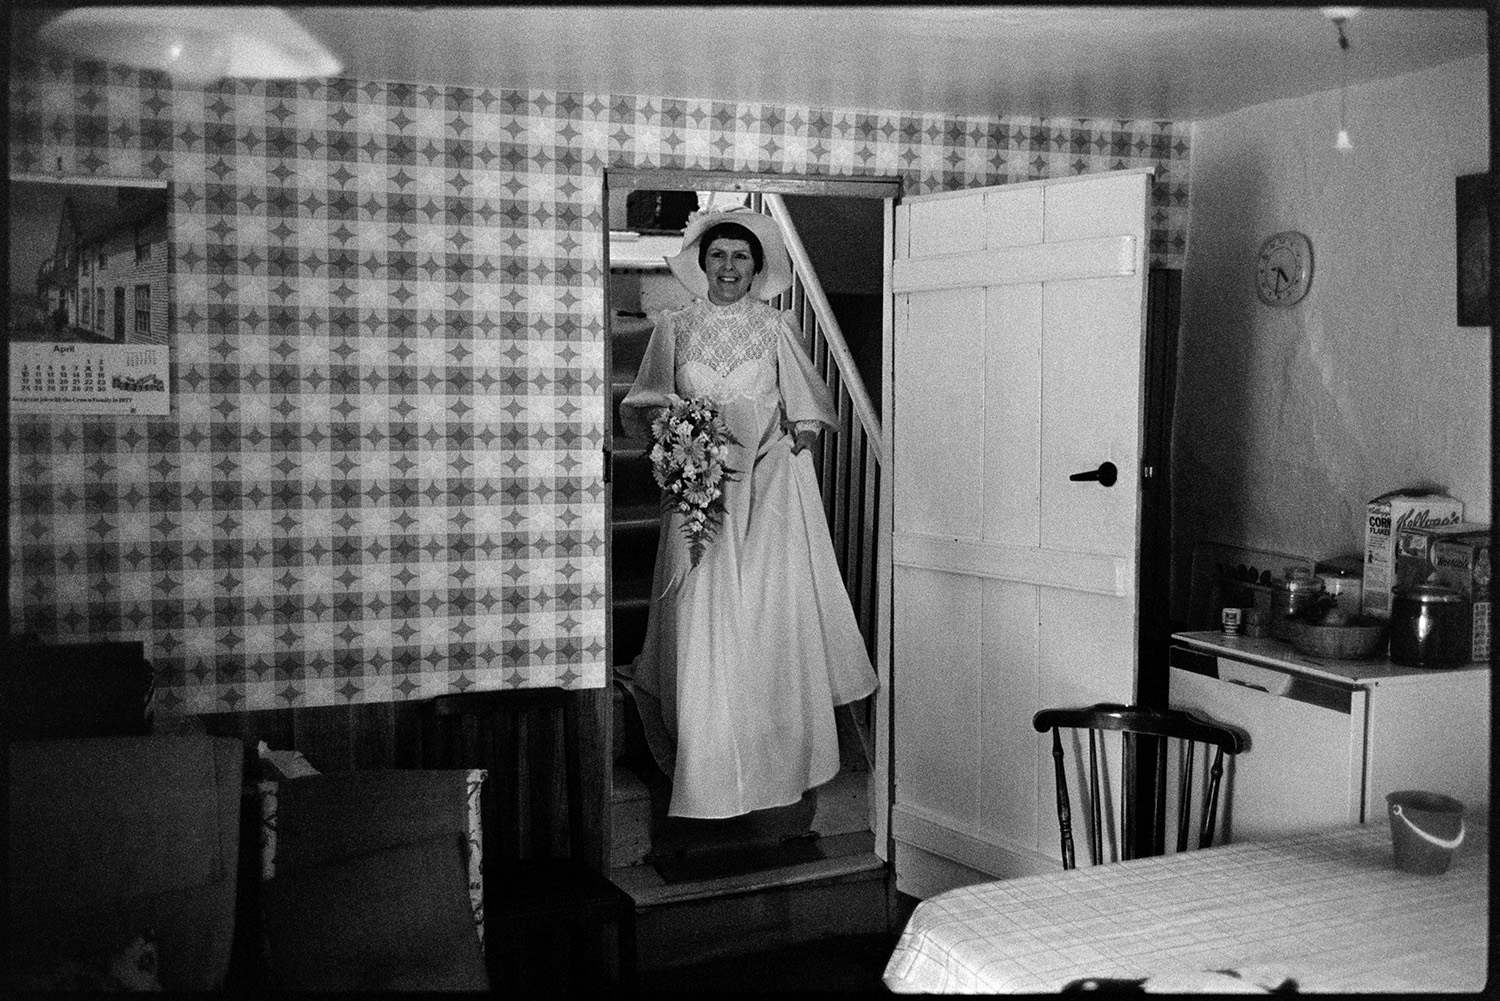 Bride and family at home, setting off for wedding in car with bridesmaid. 
[Mary Pugsley in her wedding dress at the bottom of the stairs in her house at Lower Langham, Dolton, before her wedding. She is holding a bouquet and wearing a hat decorated with flowers. A kitchen table can be seen in the foreground and one of the walls is covered with patterned wallpaper.]